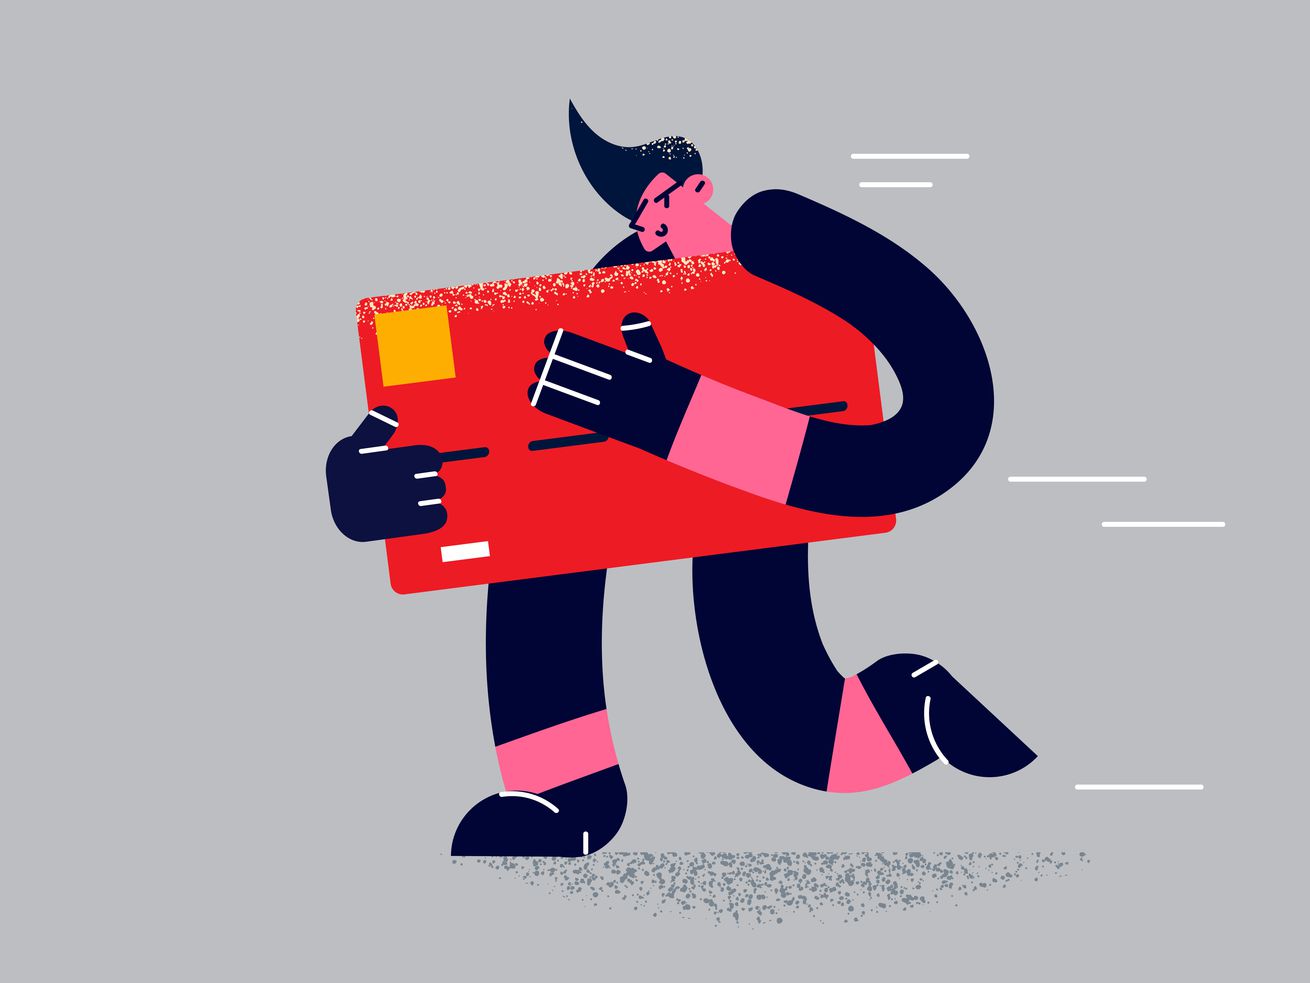 An illustration of a person stealing a giant credit card.